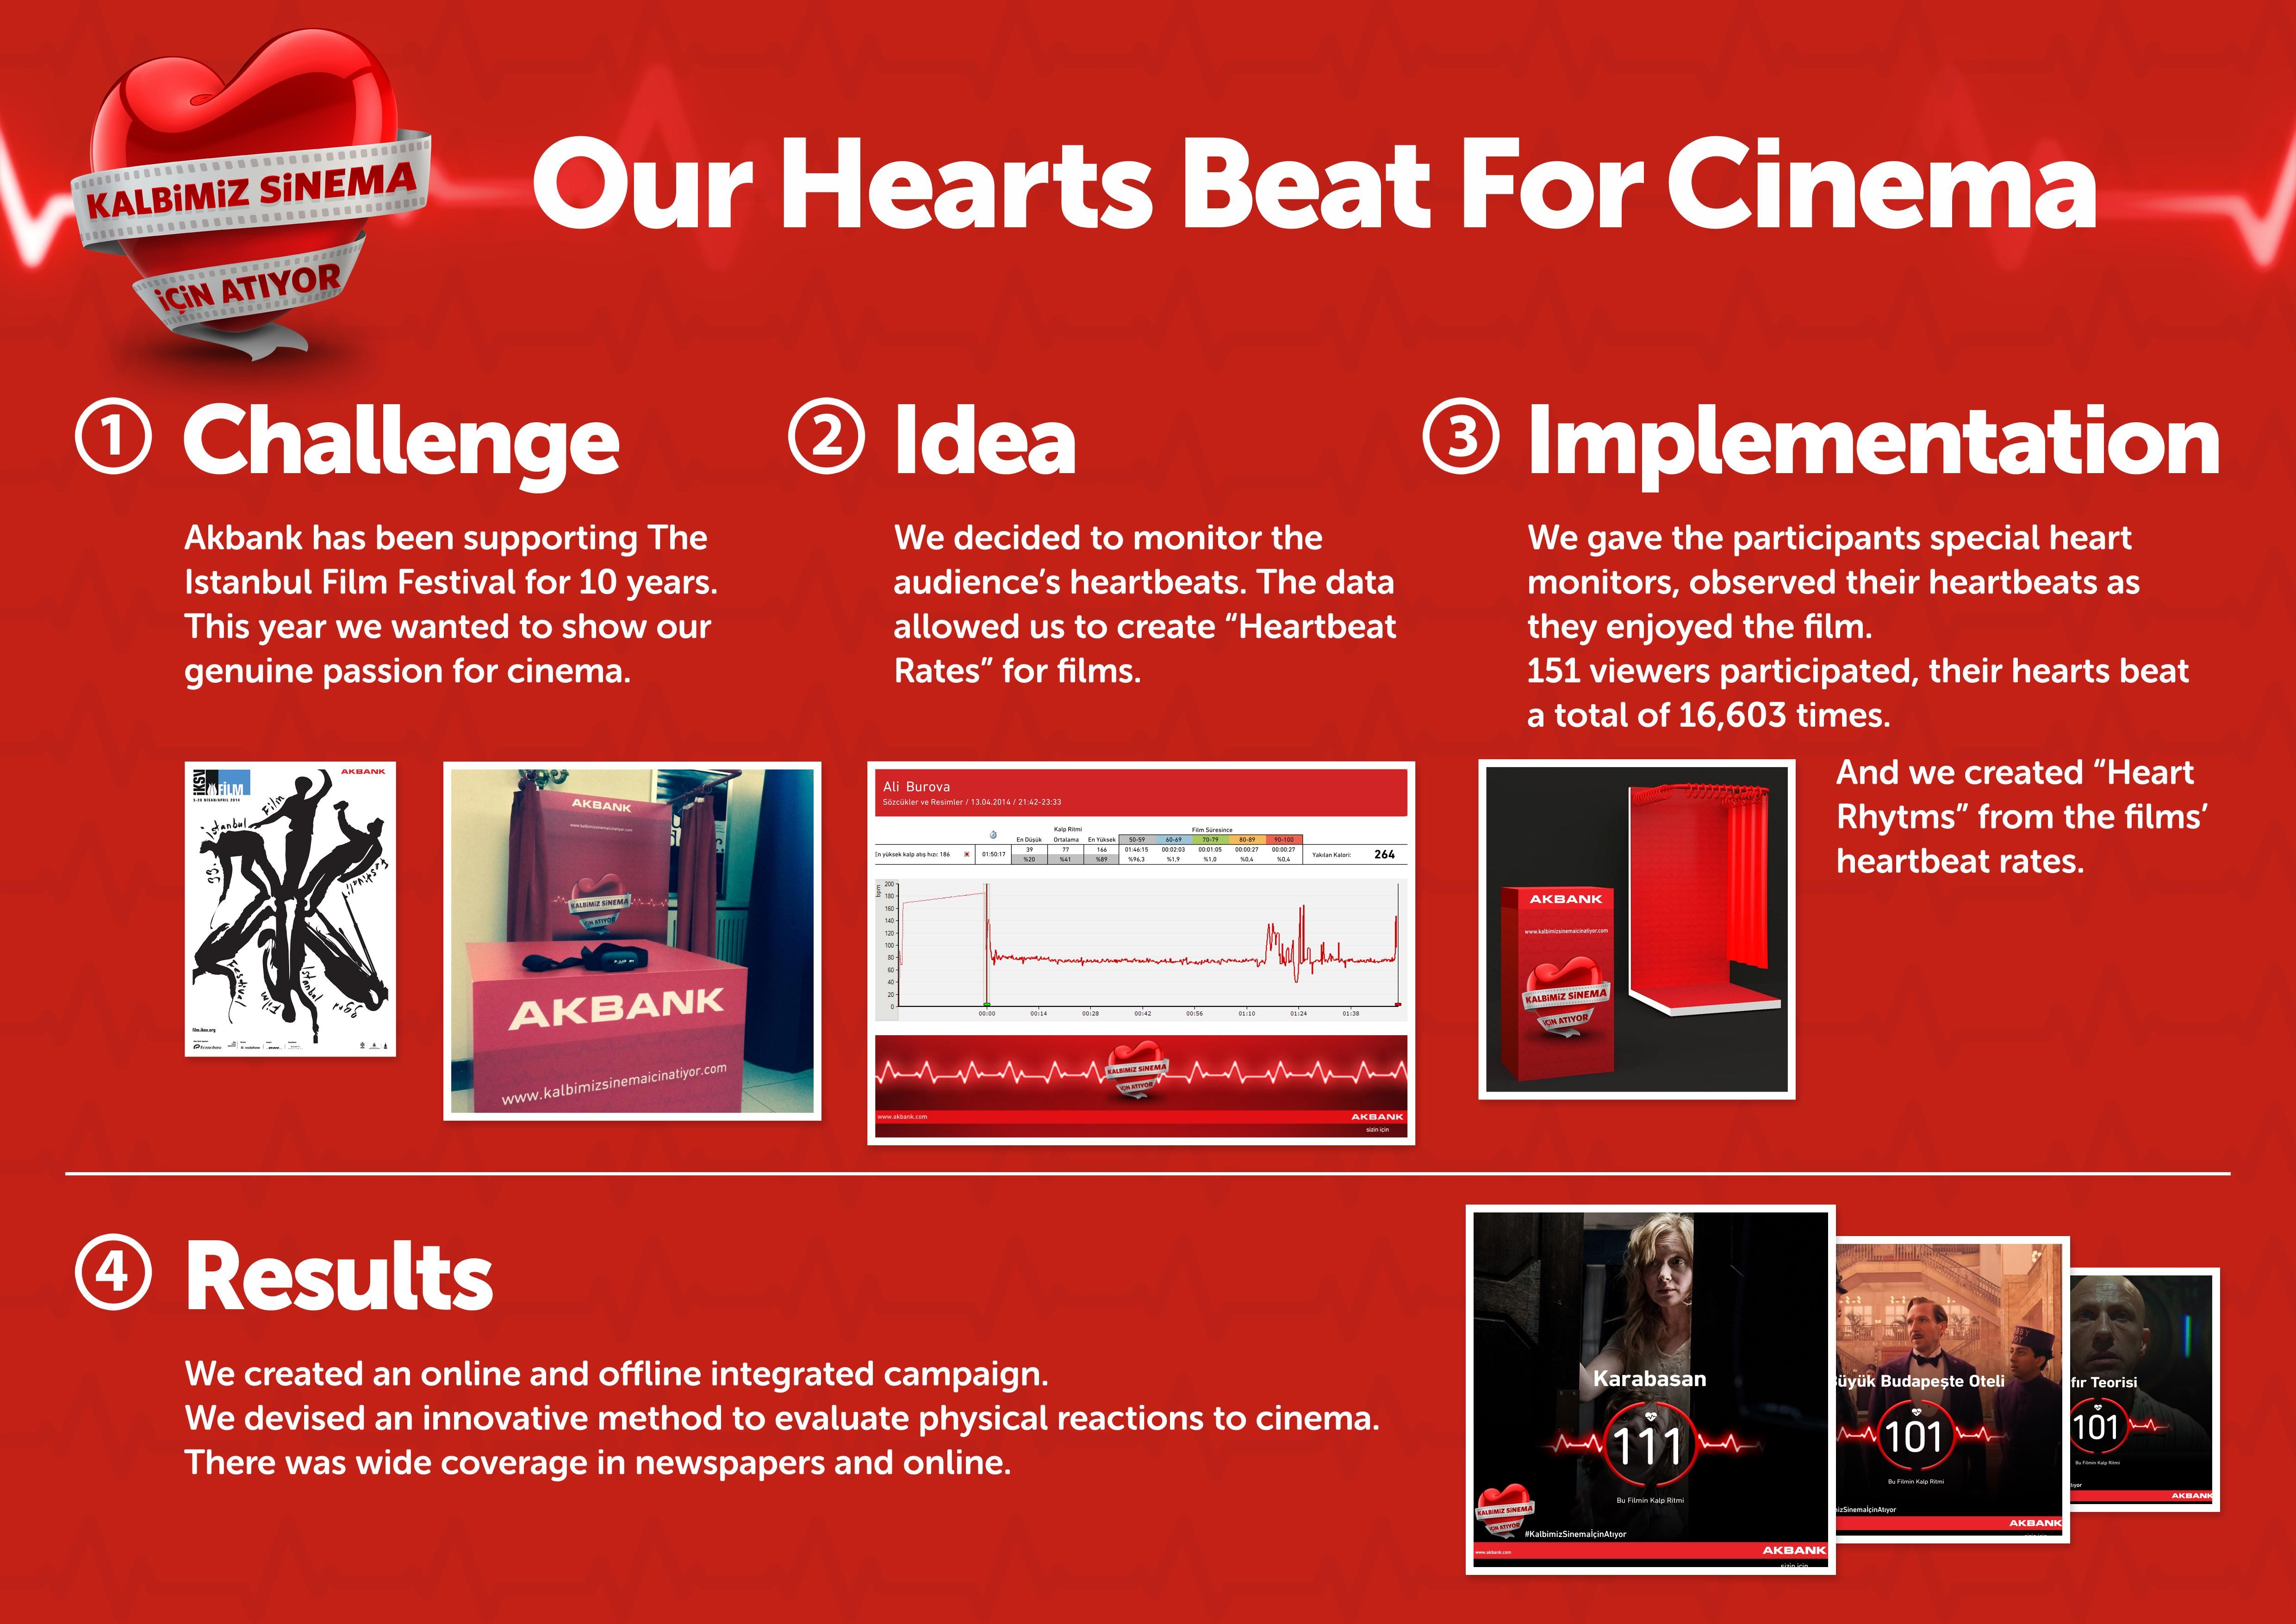 OUR HEARTS BEAT FOR CINEMA